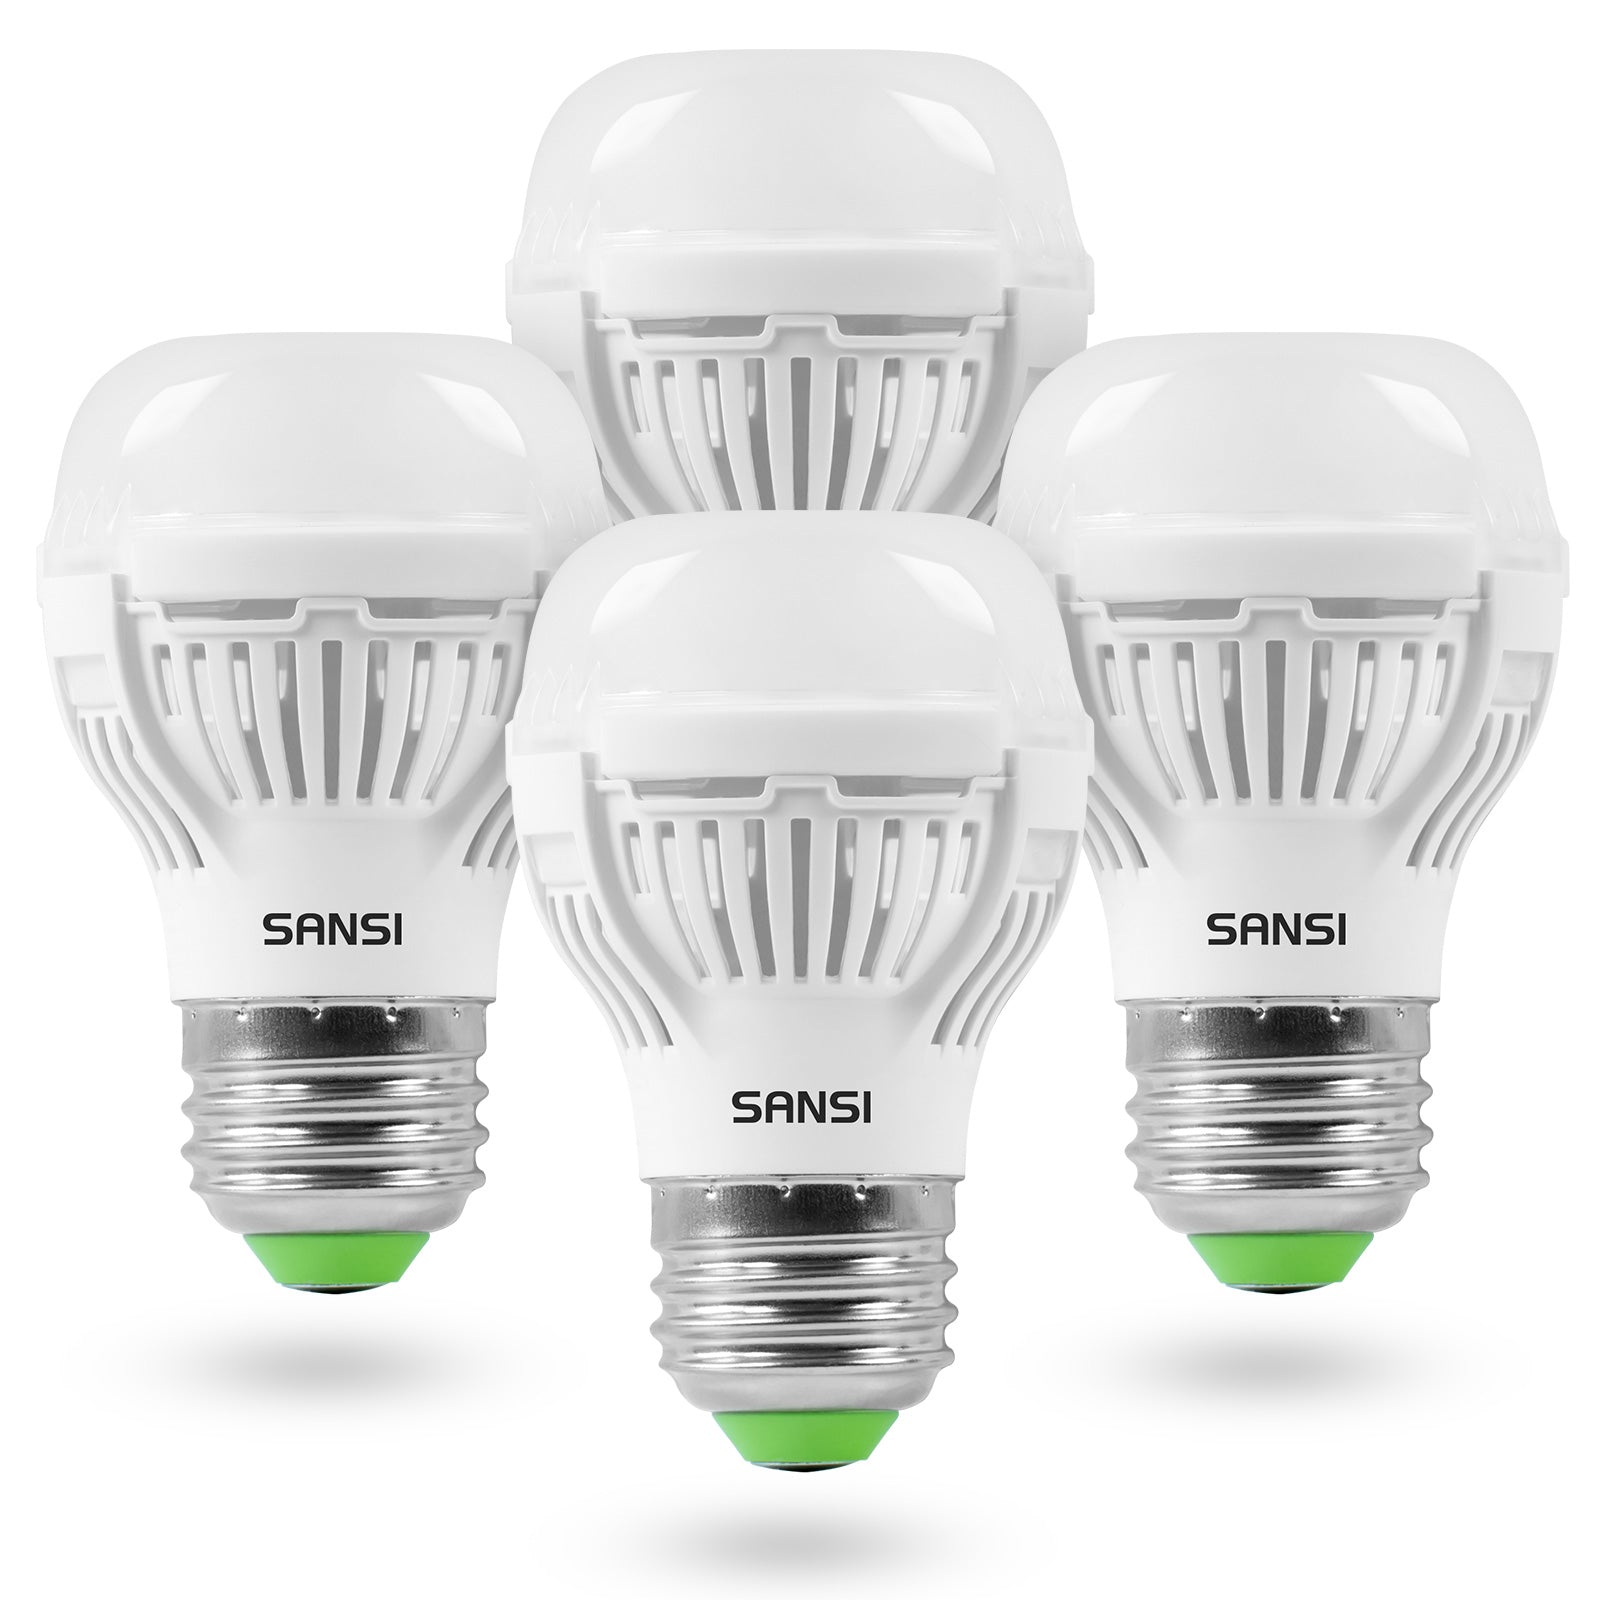 Upgraded A15 9W led light bulb with Flicker-Free for your home, 4 pack